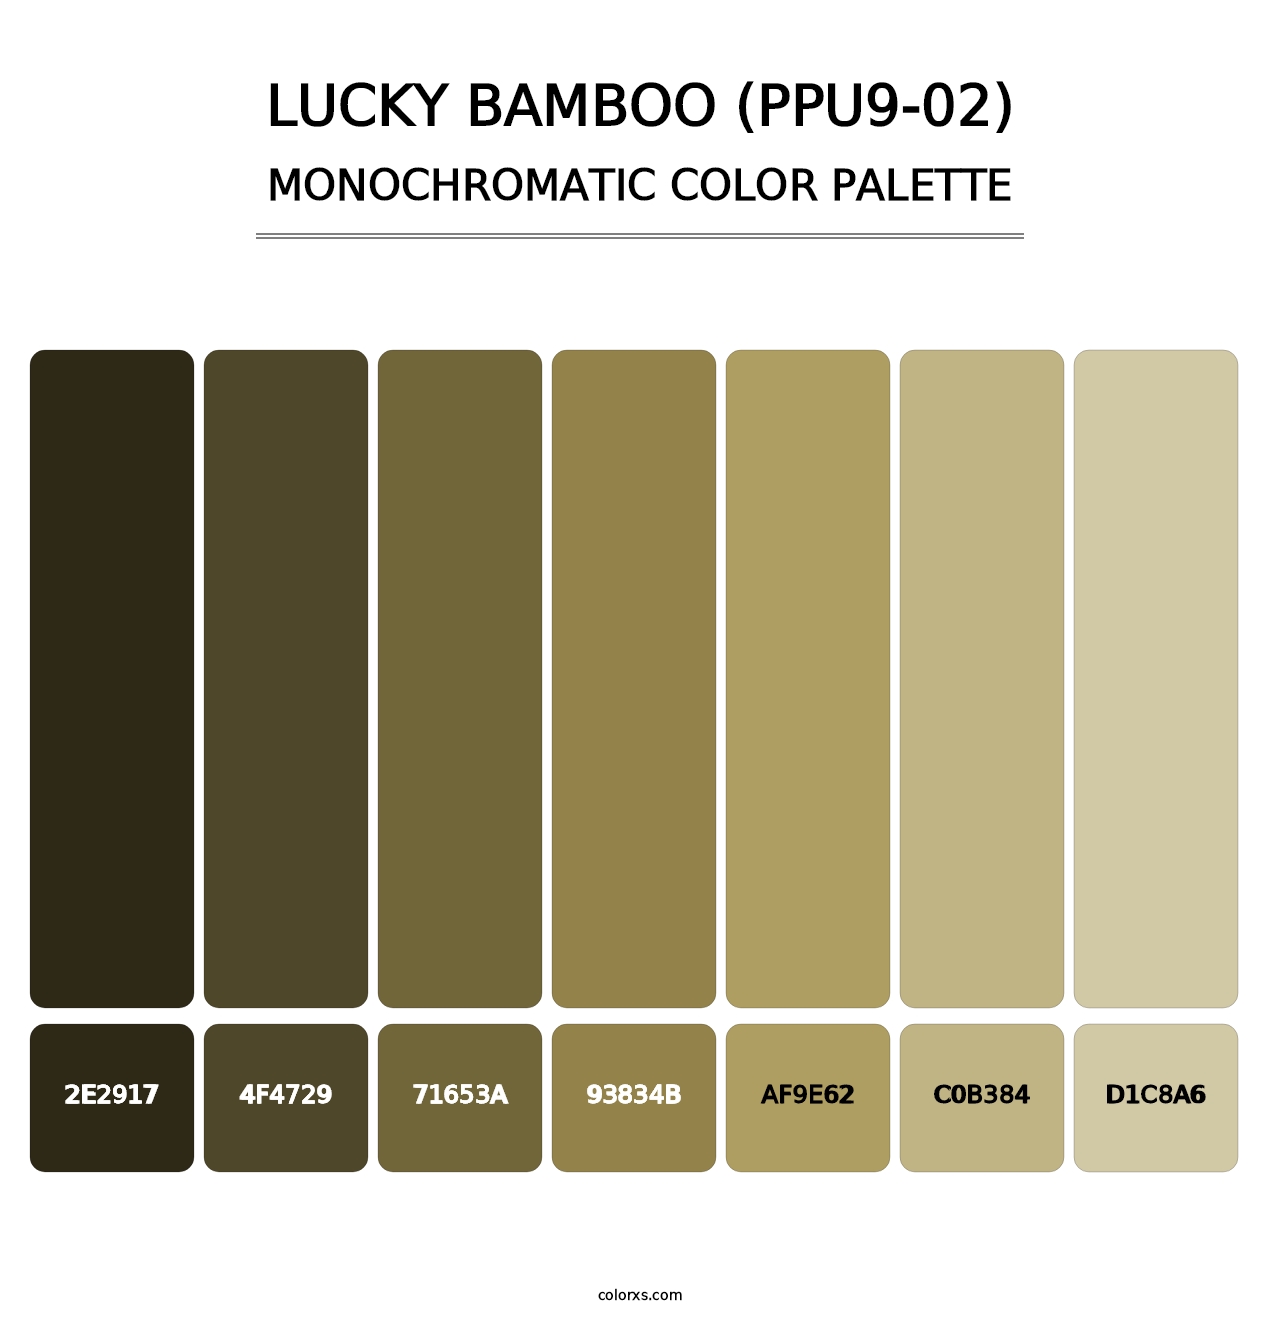 Lucky Bamboo (PPU9-02) - Monochromatic Color Palette